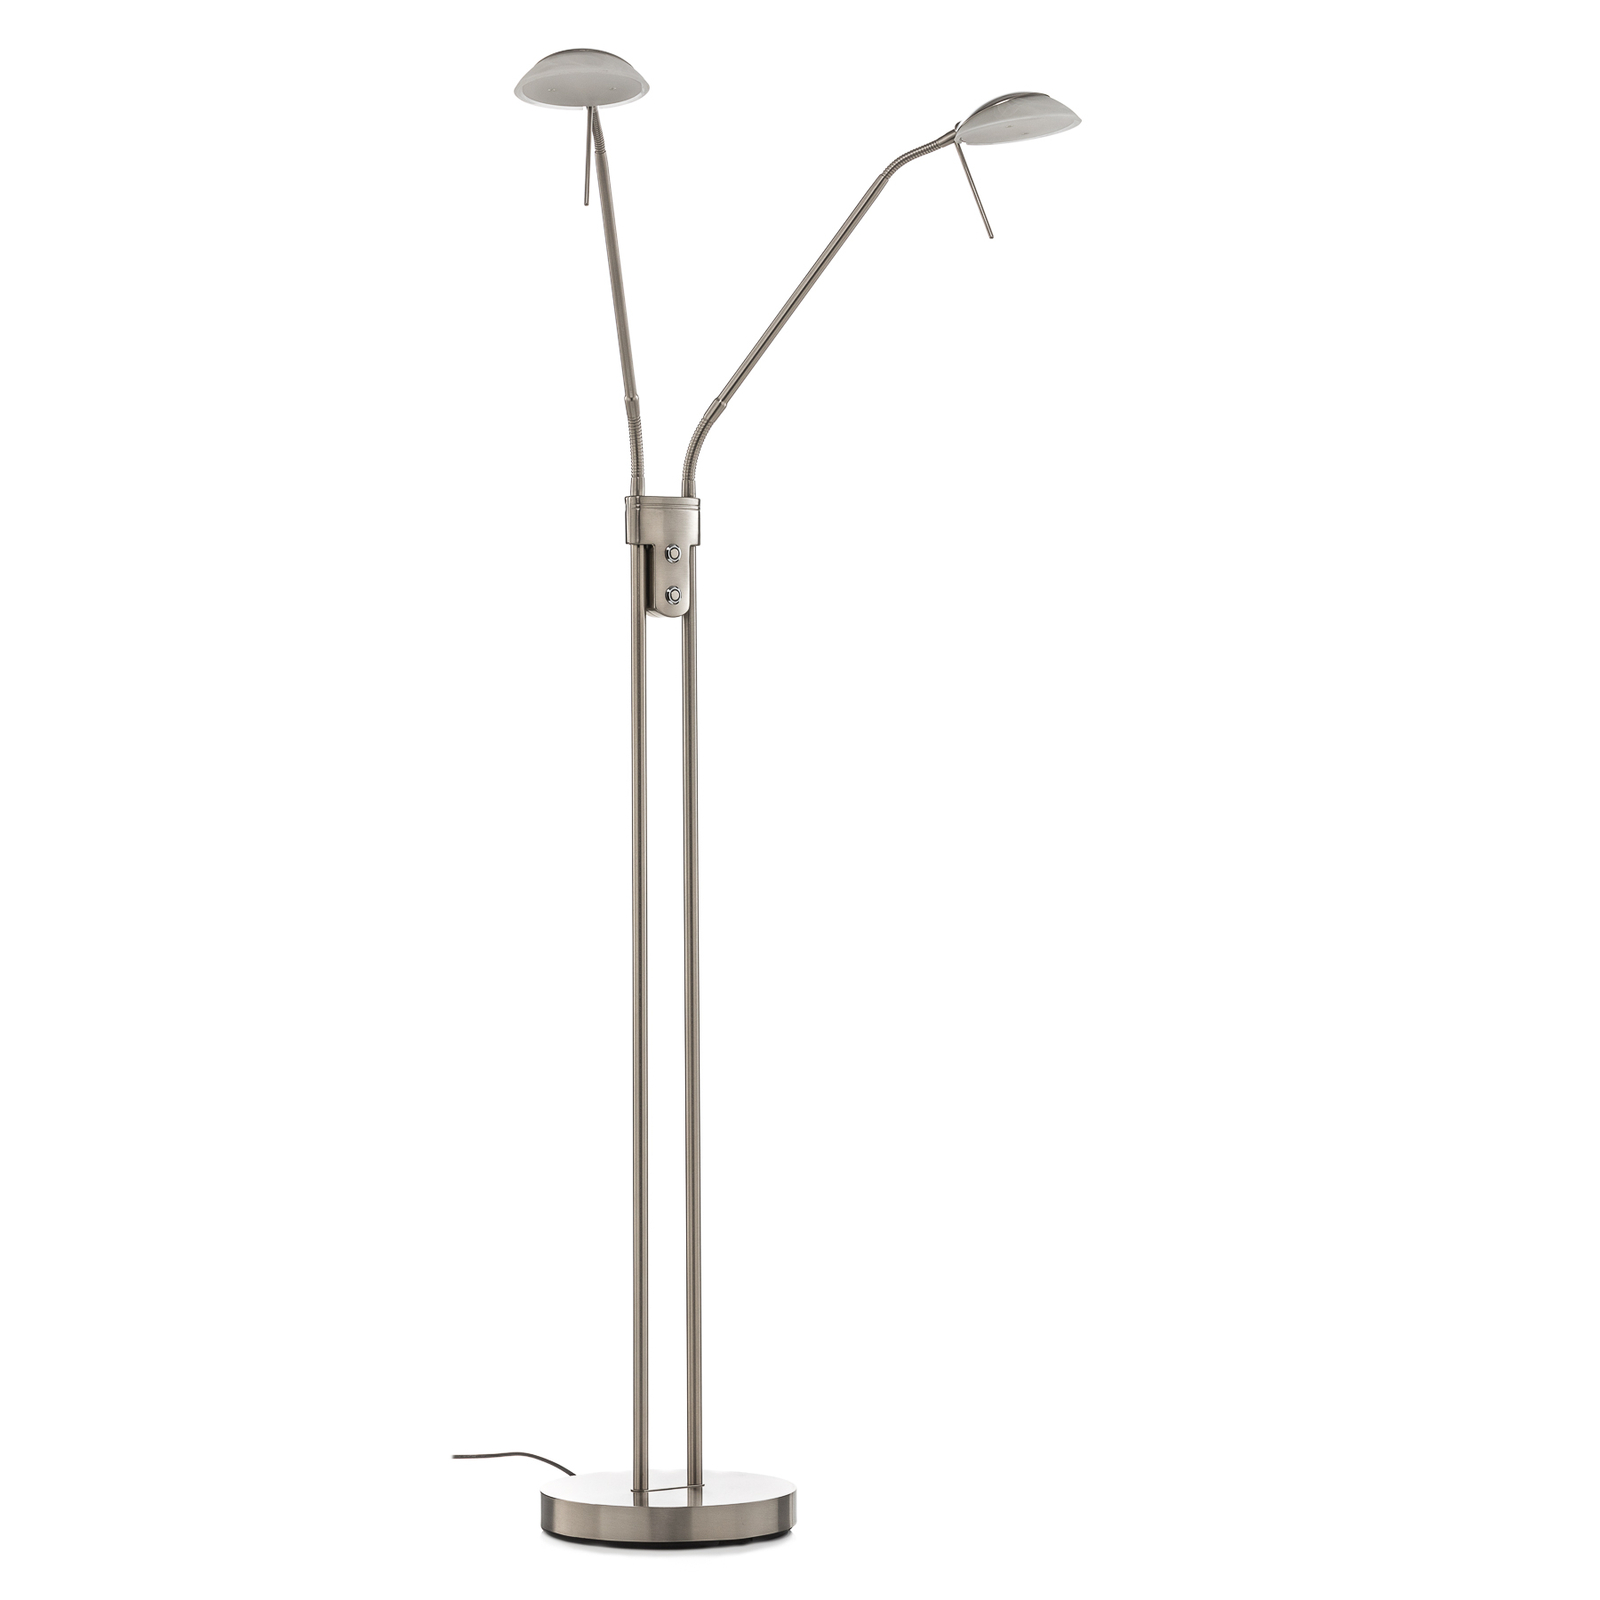 Lampadaire LED Pool TW, à 2 lampes, nickel